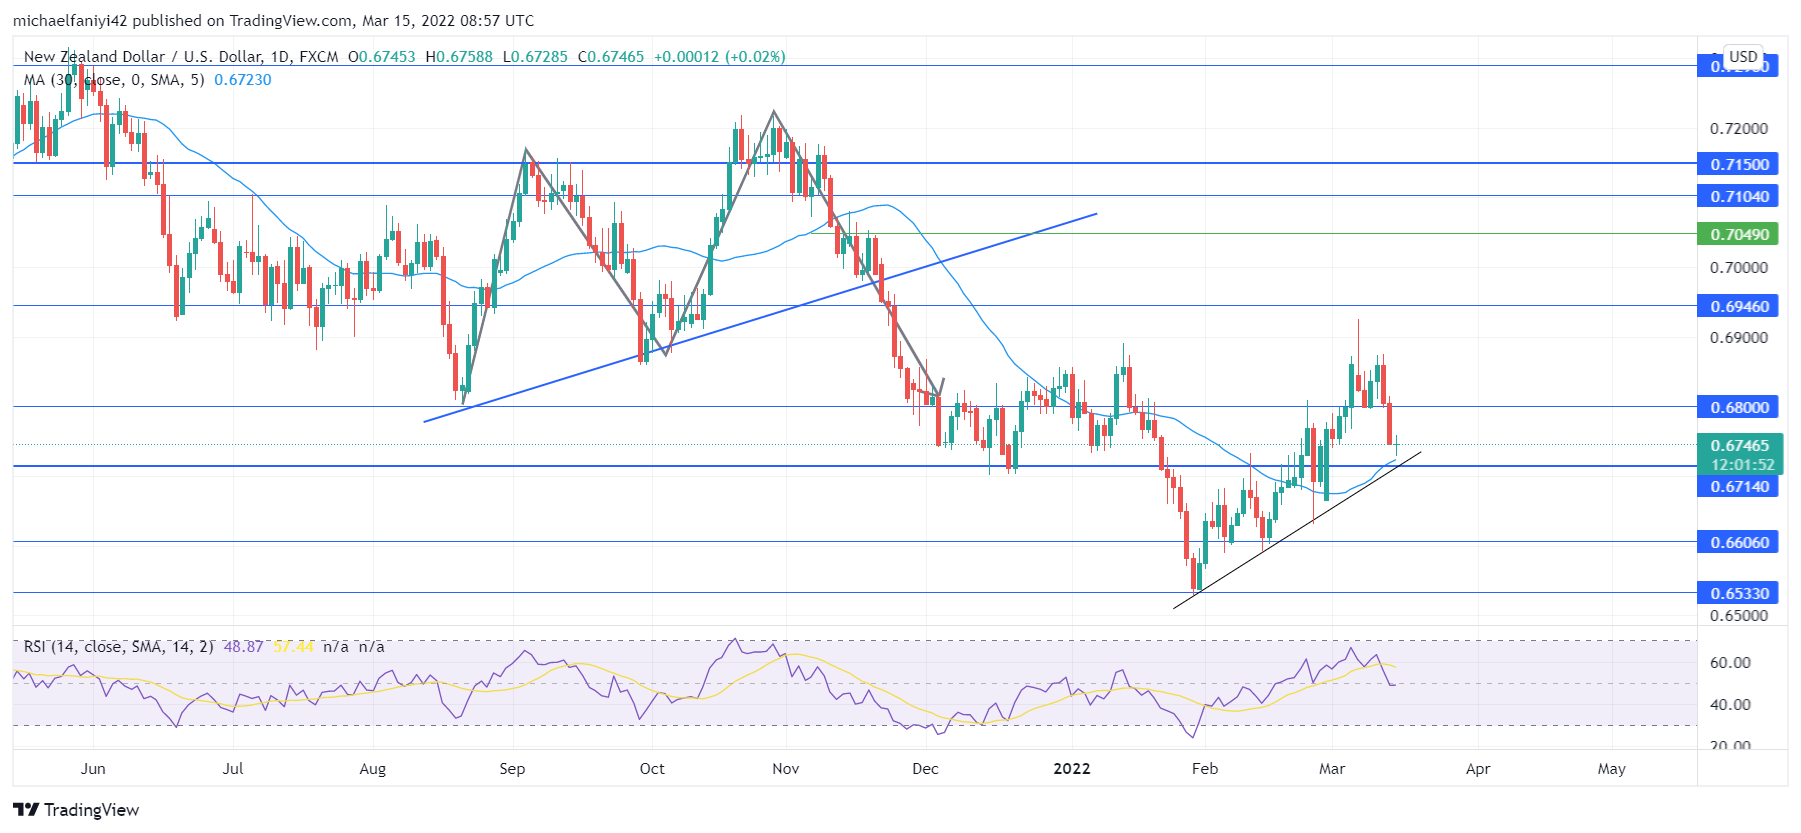 NZDUSD Continues Resurgence to Mount Above a Critical Level